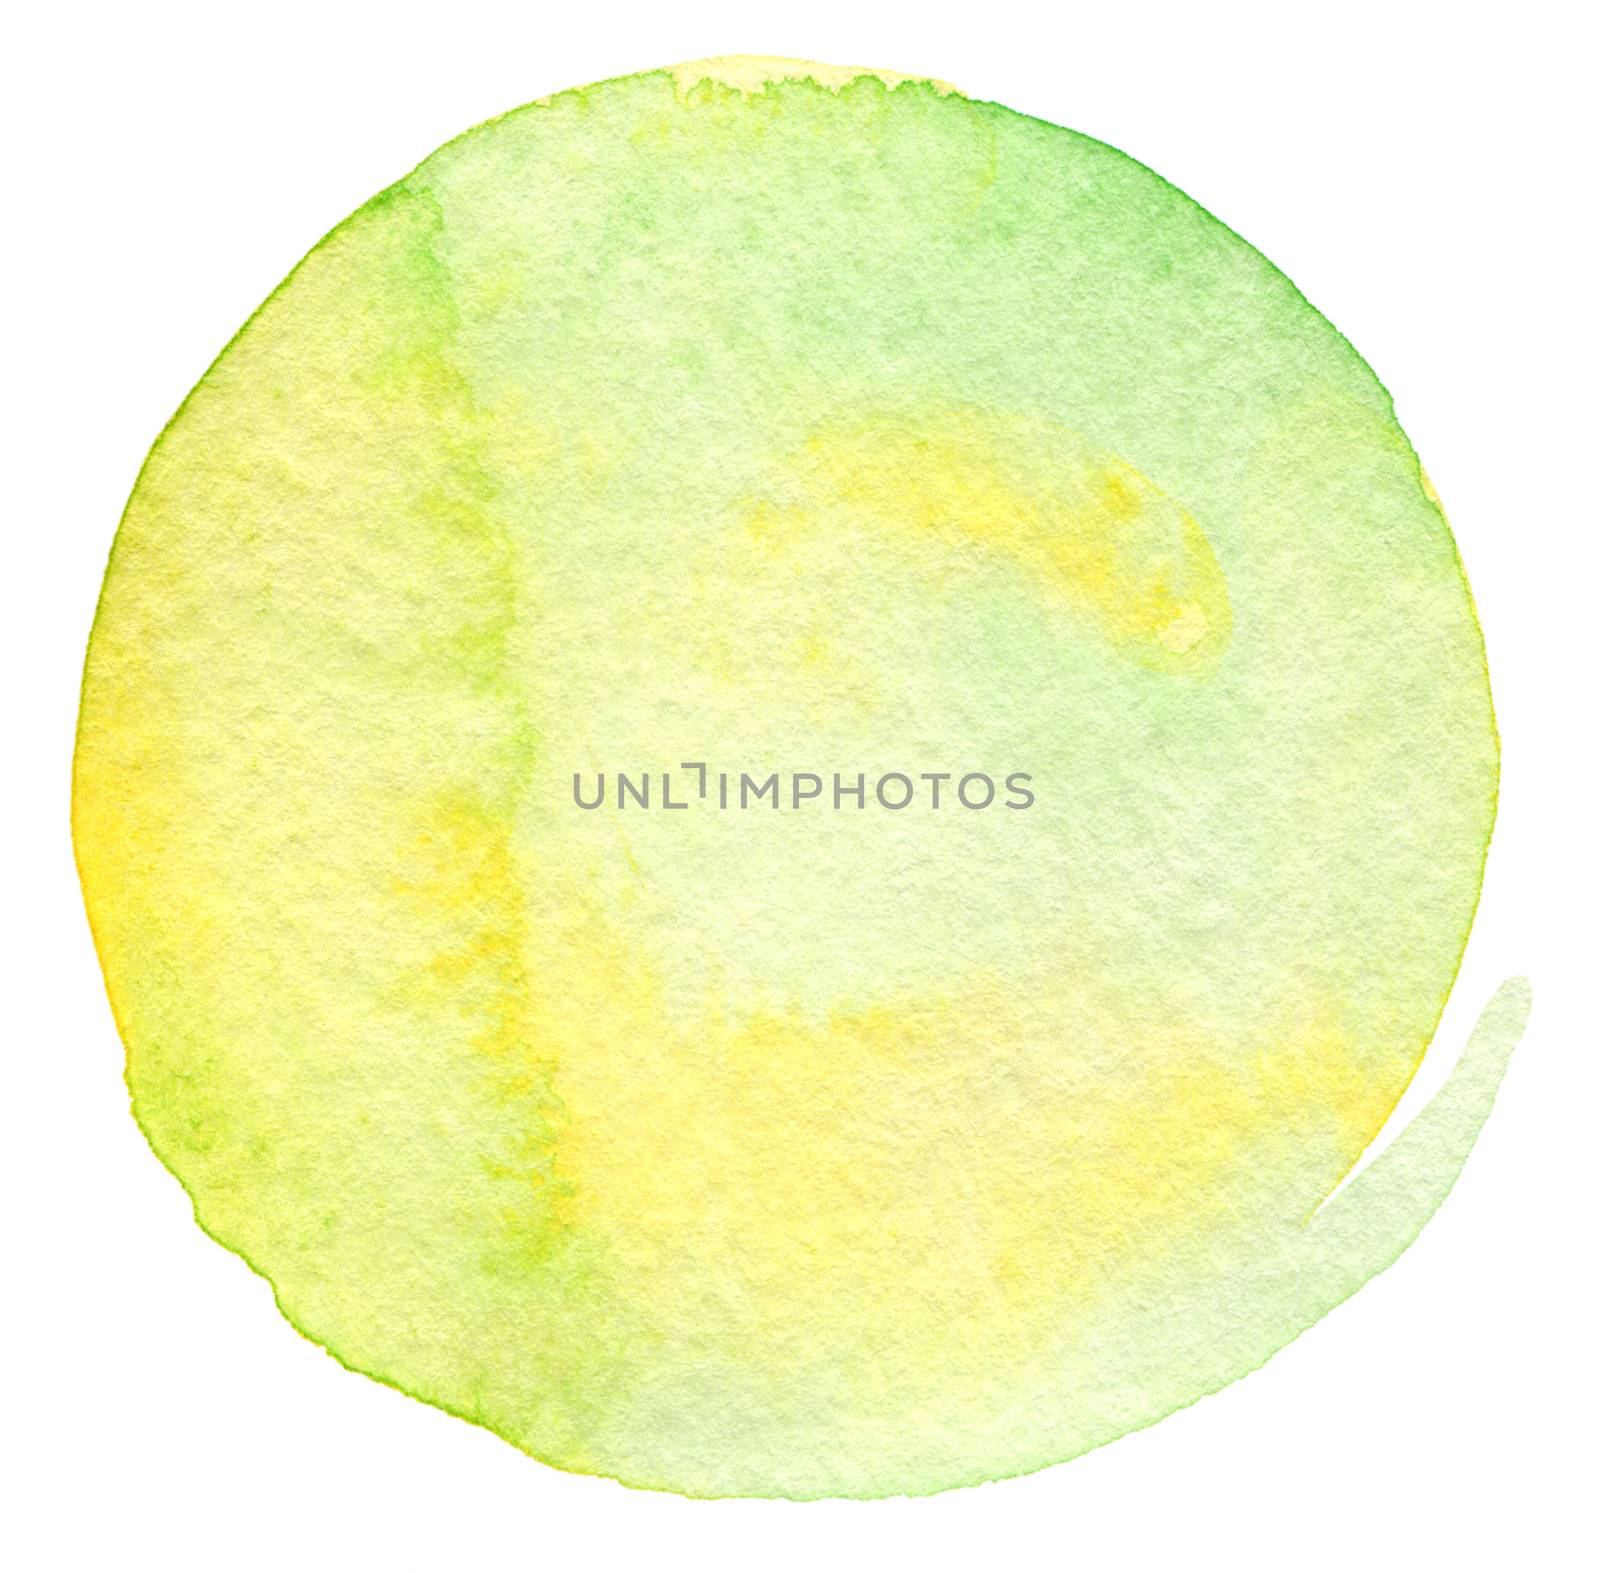 Abstract  circle watercolor painted background